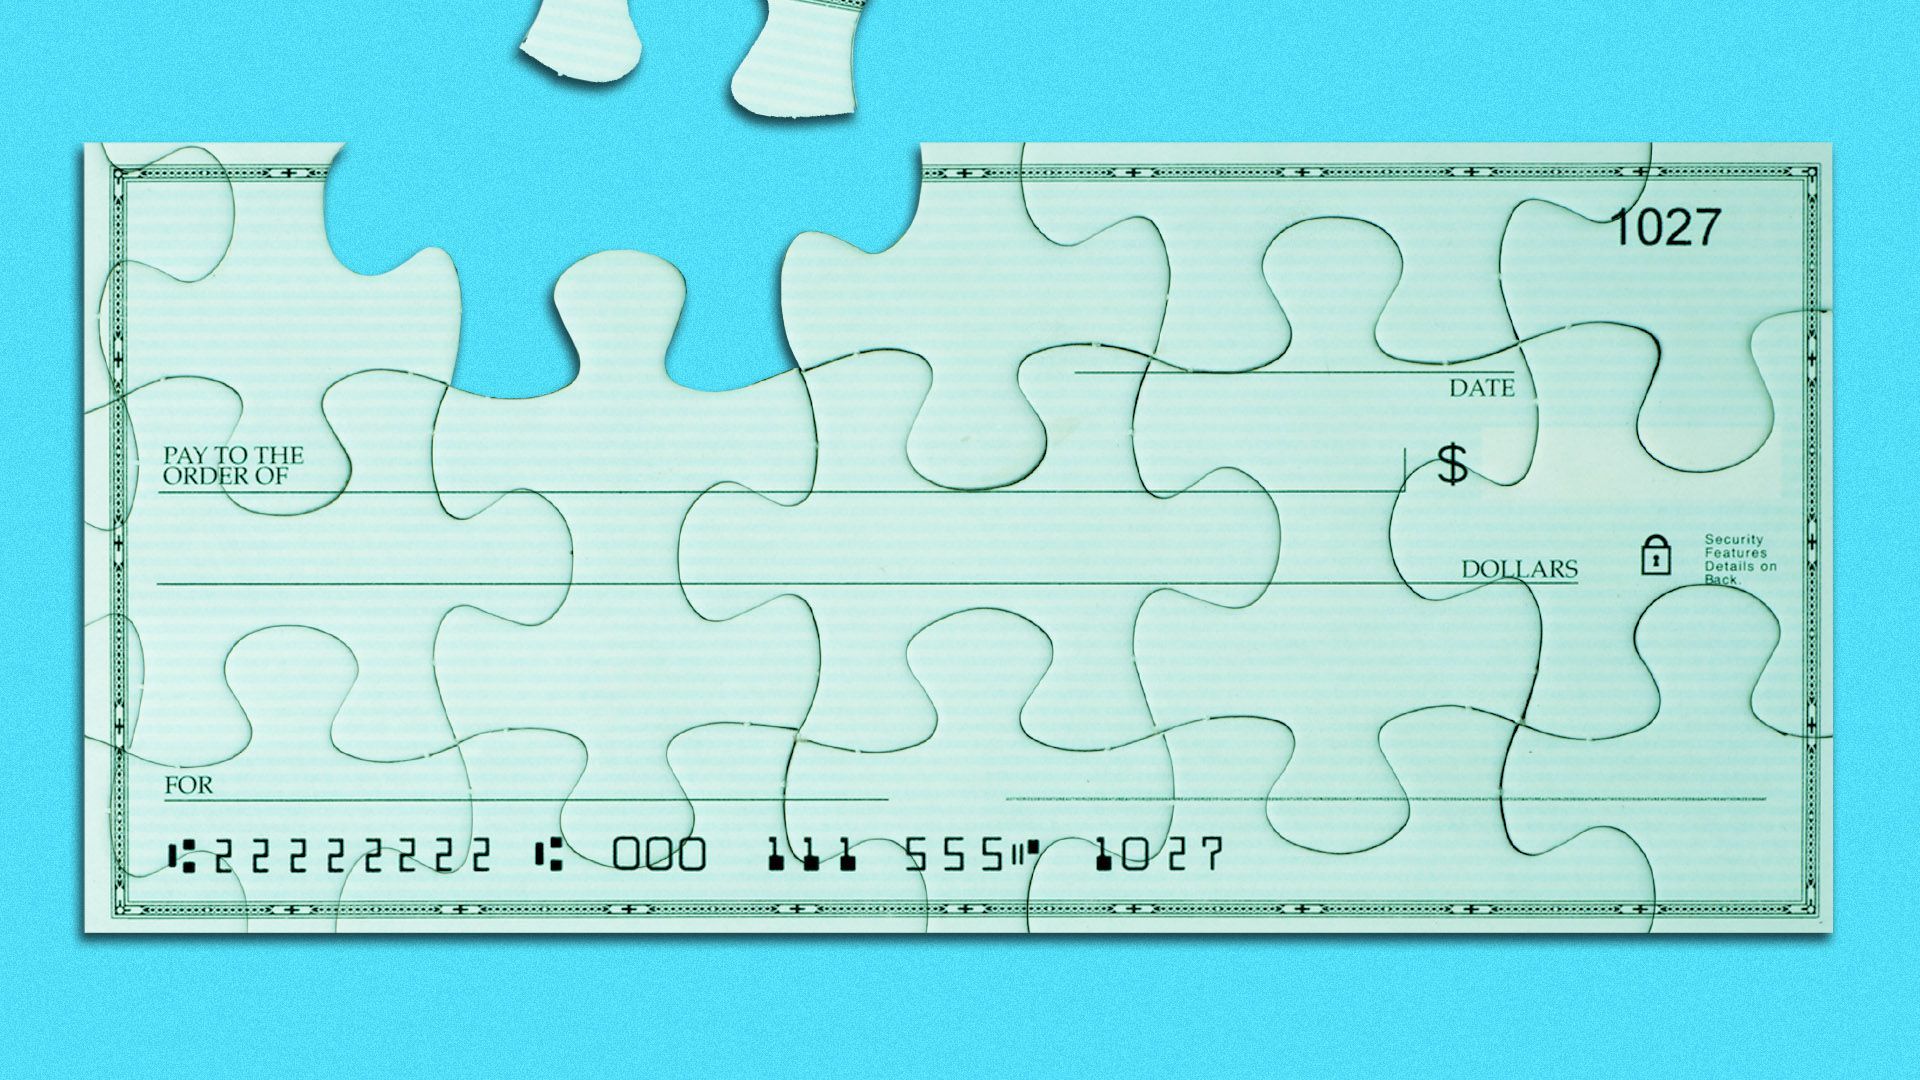 Illustration of a check made out of puzzle pieces